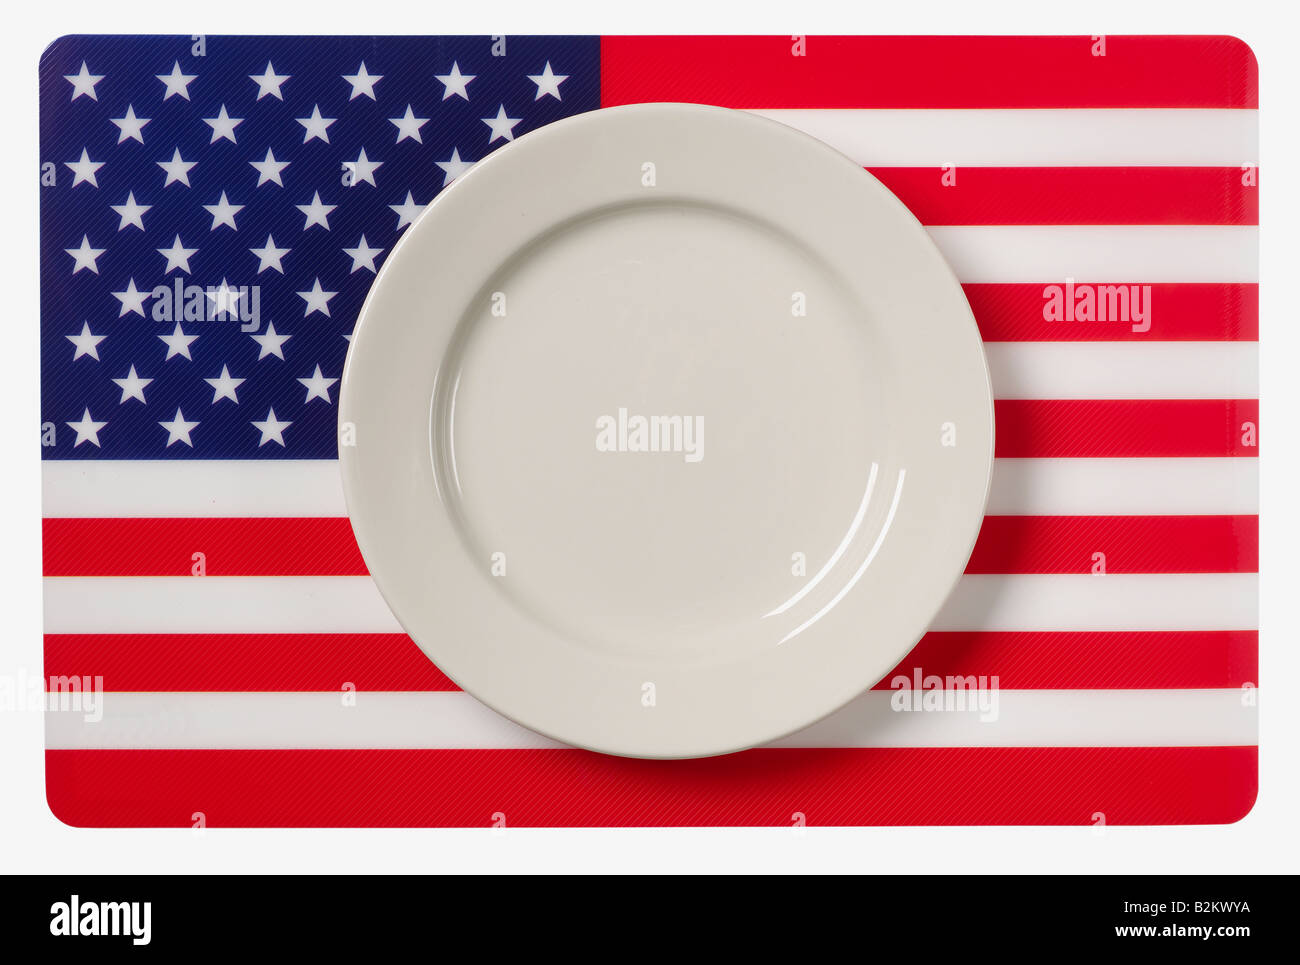 American Flag plate concept Stock Photo